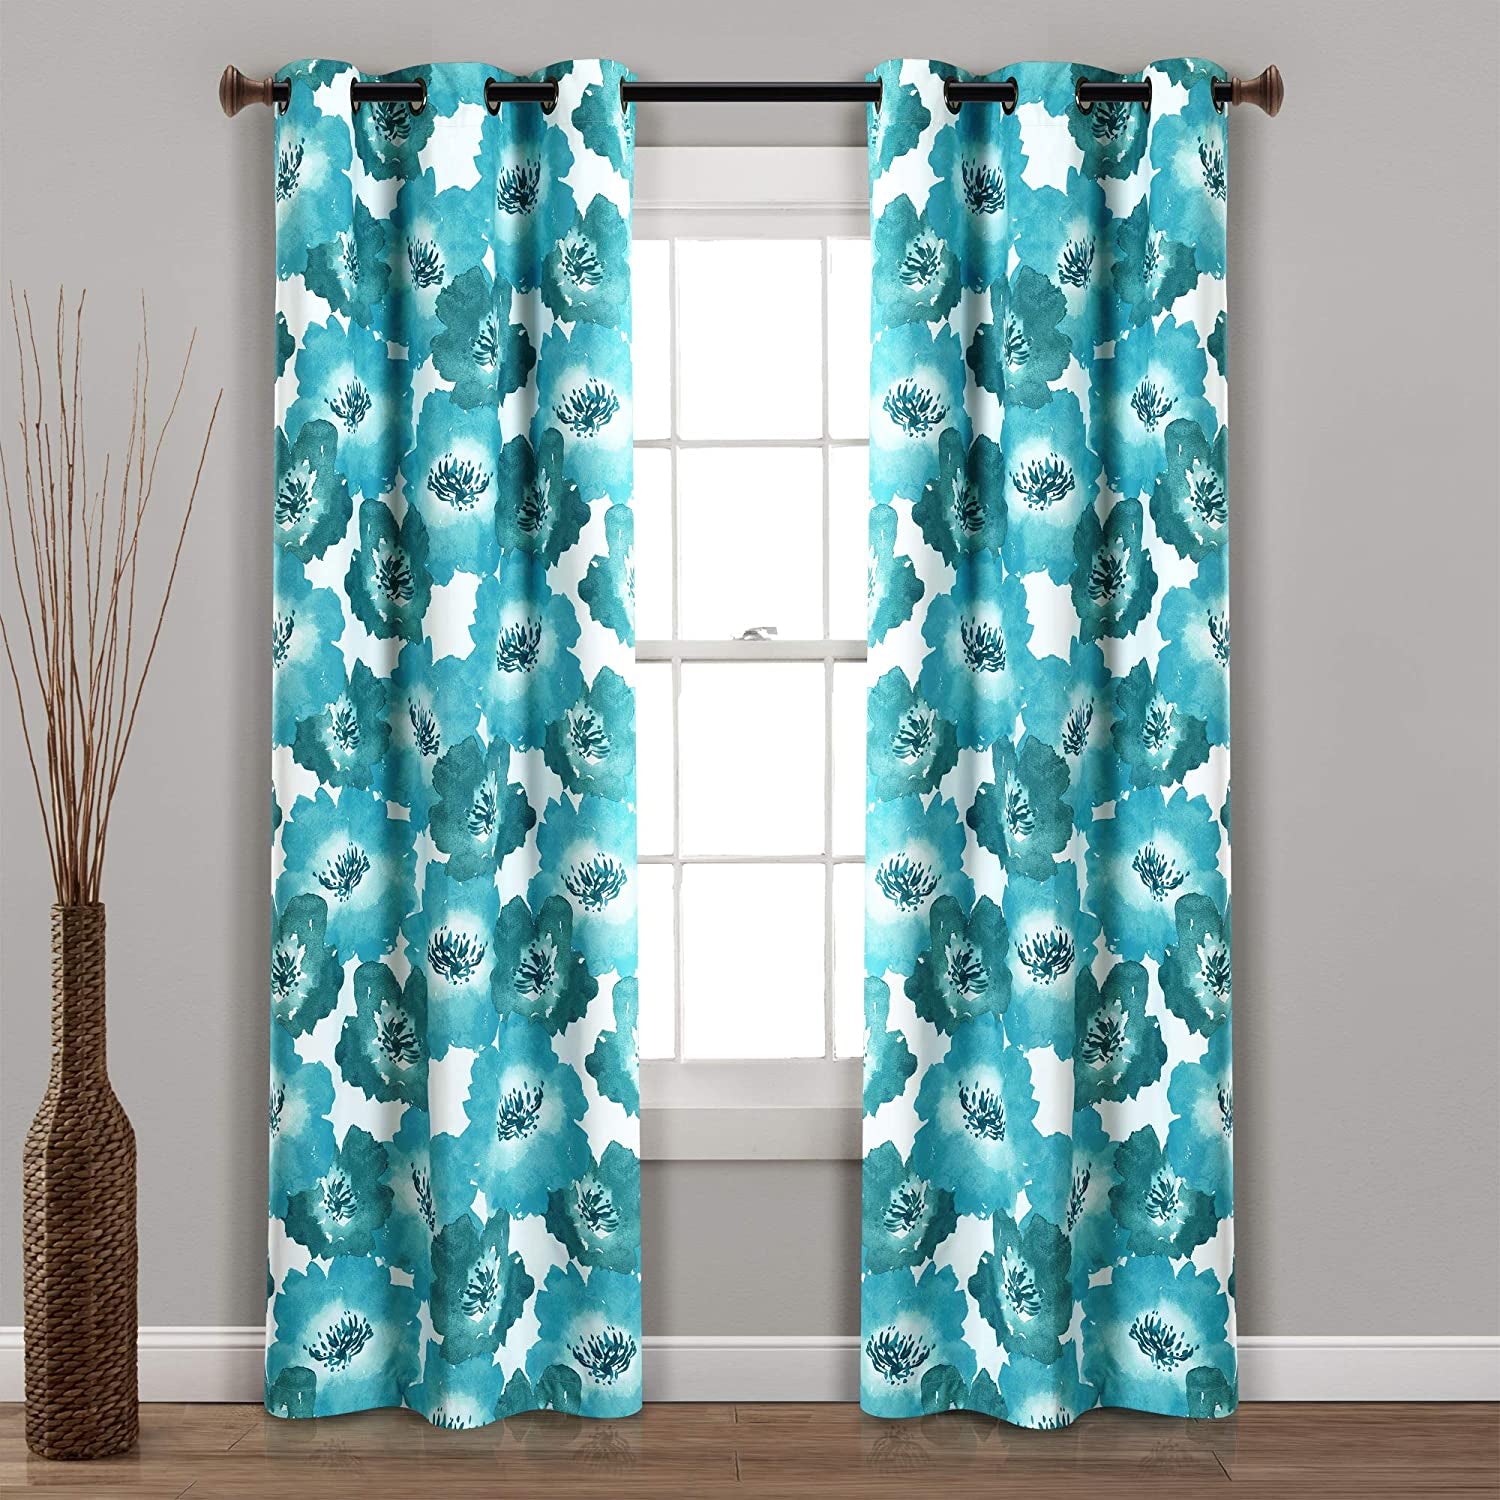 Leah (Julie) Floral Insulated Grommet 100% Blackout Window Curtain Panel Pair, 38" W X 84" L, Blue and Teal